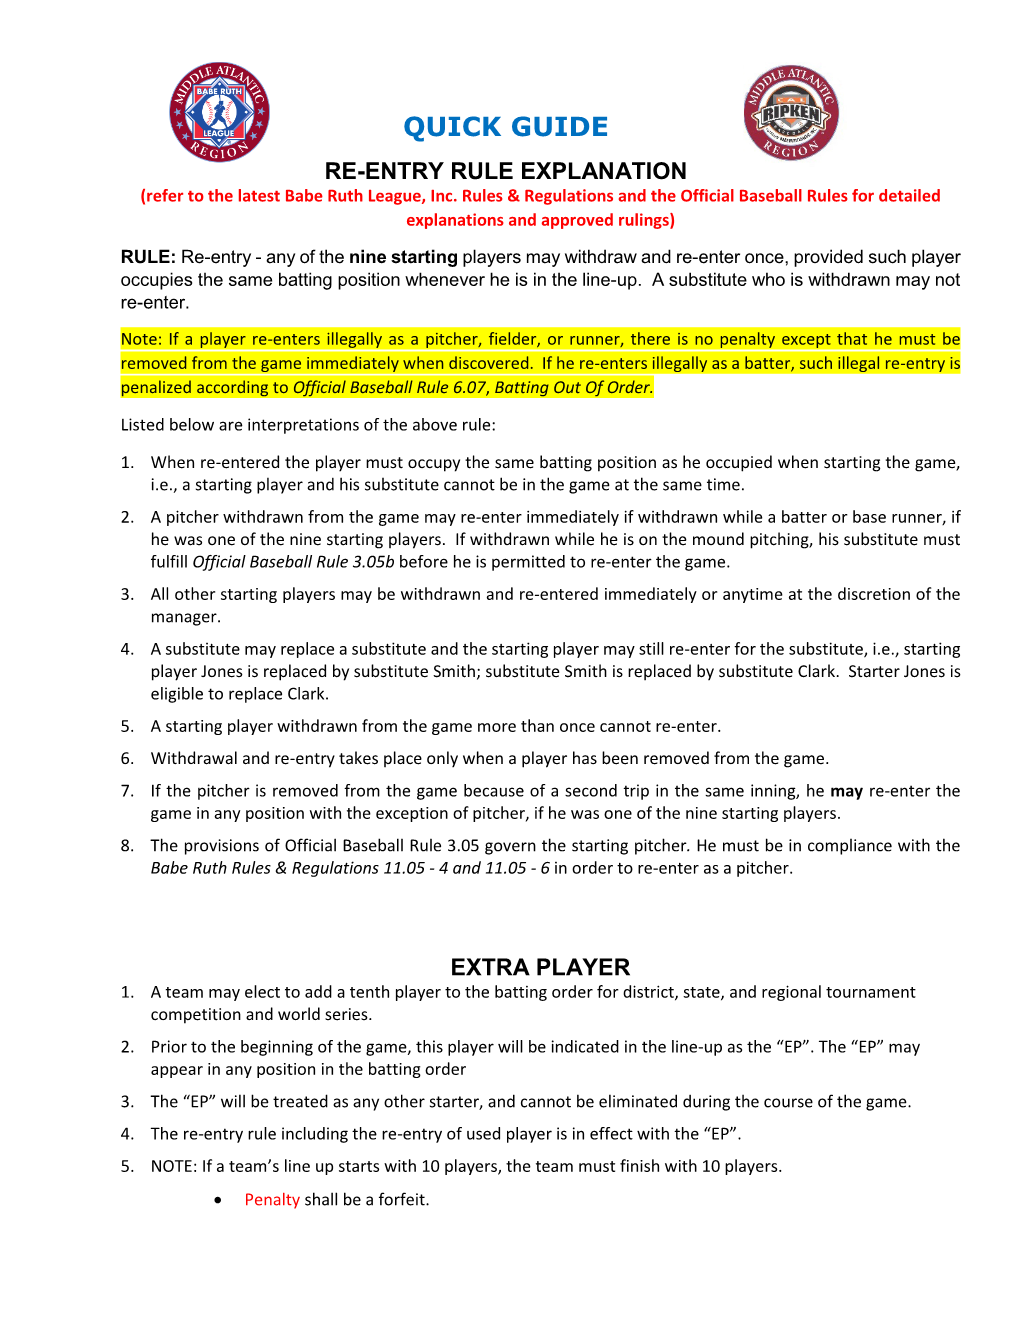 Re-Entry Rule & Extra Player Rule